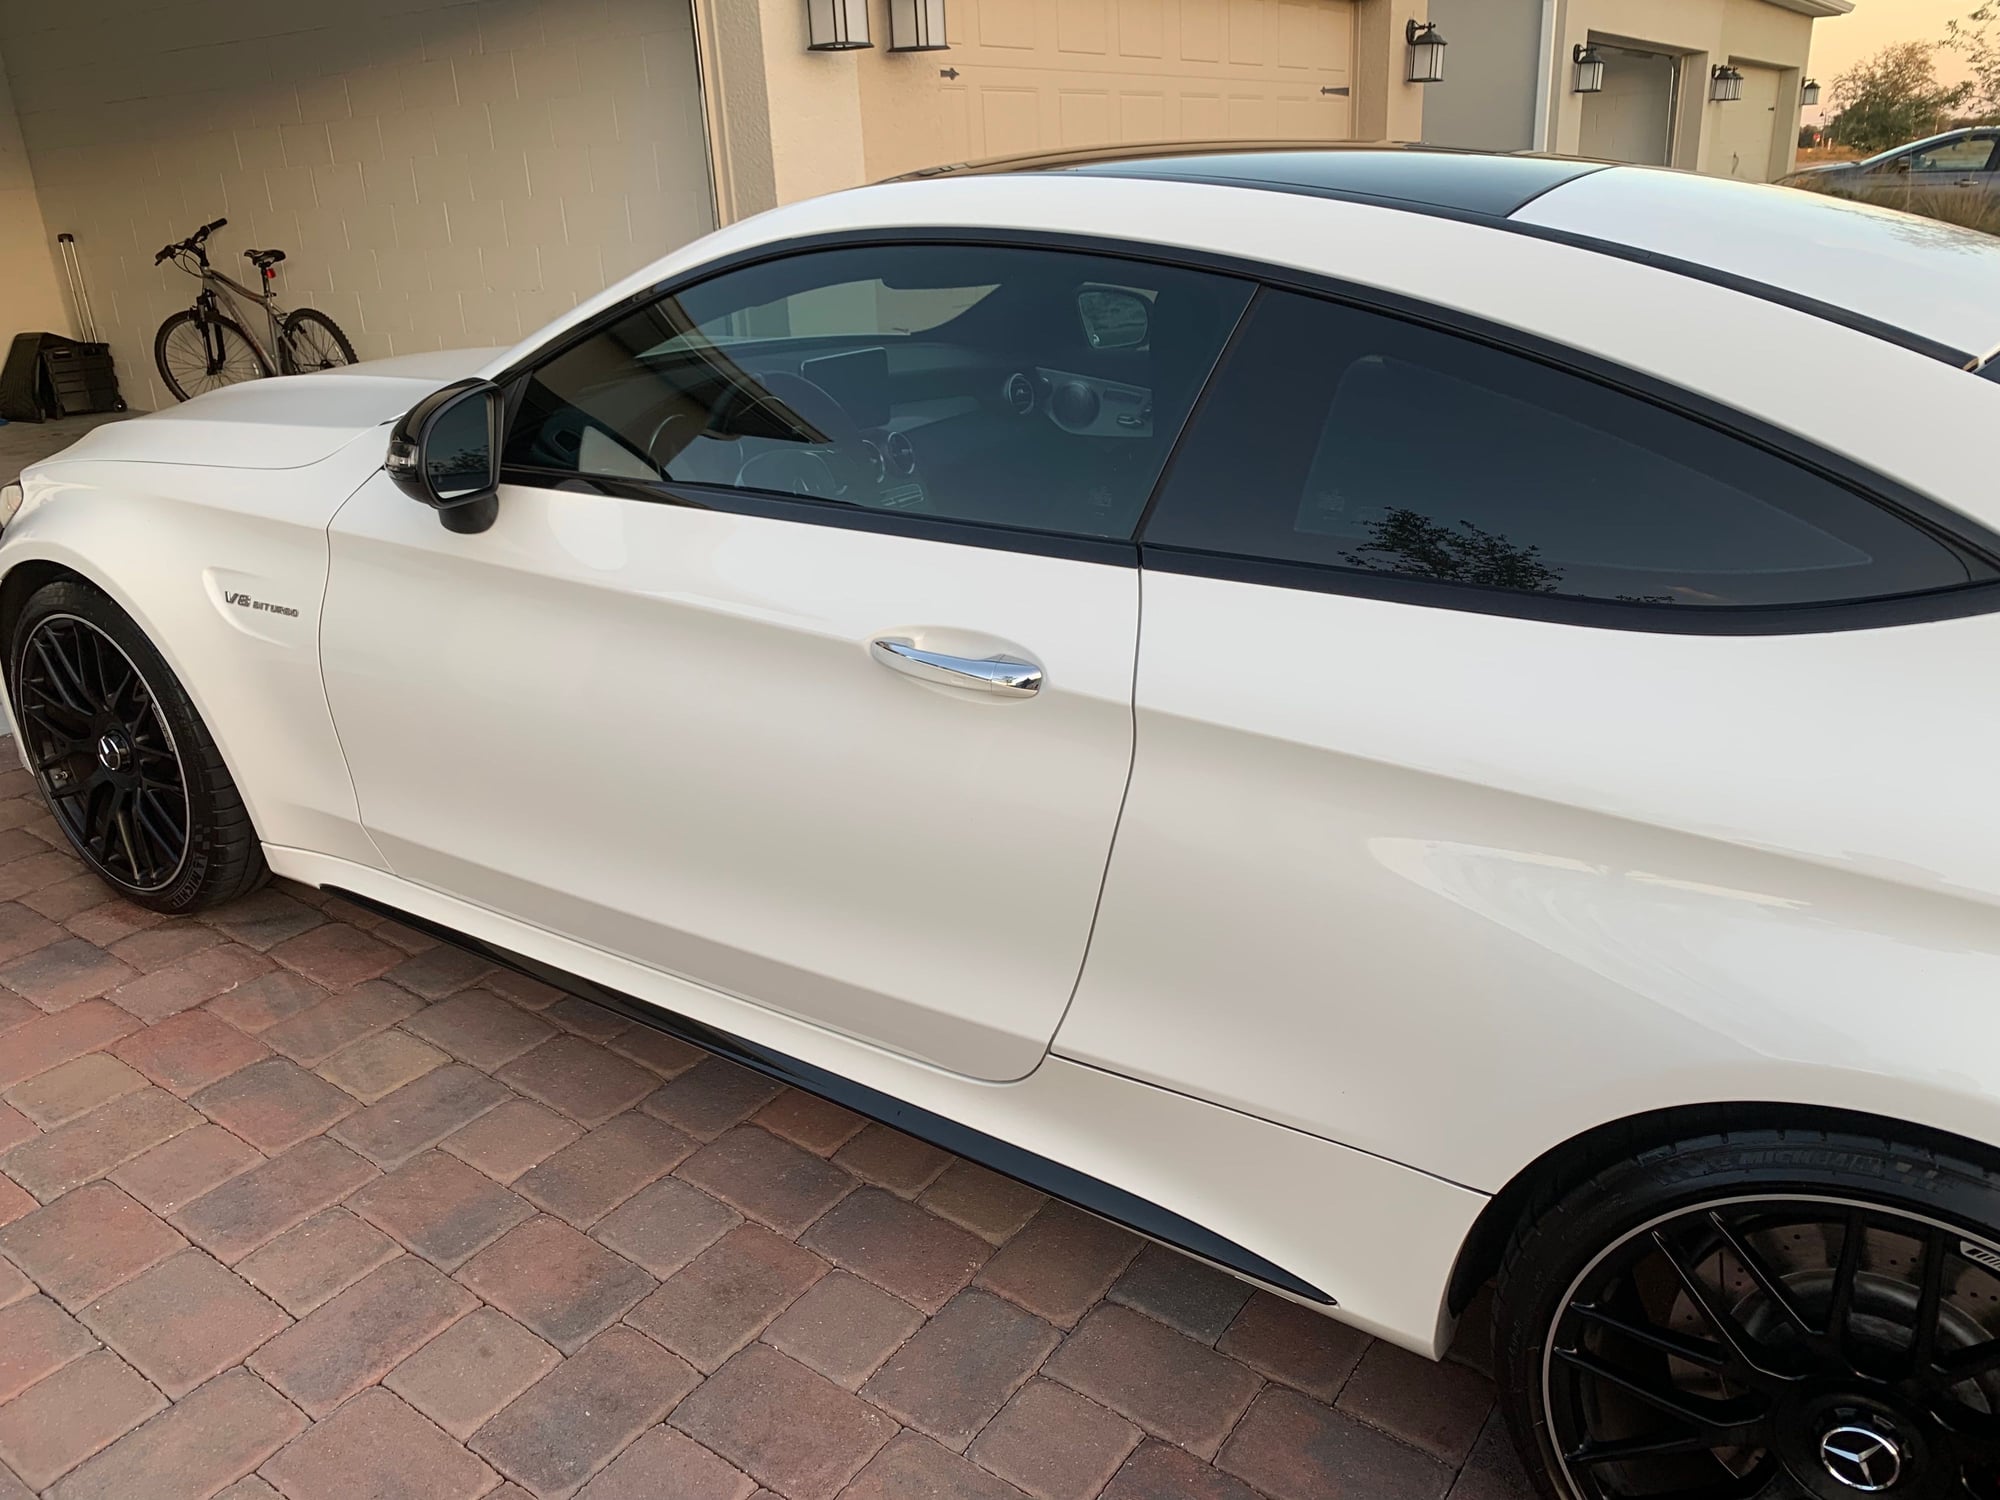 2017 Mercedes-Benz C63 AMG S - FS: 2017 Mercedes C63 AMG S (White) - Used - VIN WDDWJ8HB6HF475467 - 24,500 Miles - 8 cyl - 2WD - Automatic - Coupe - White - Orlando, FL 32832, United States